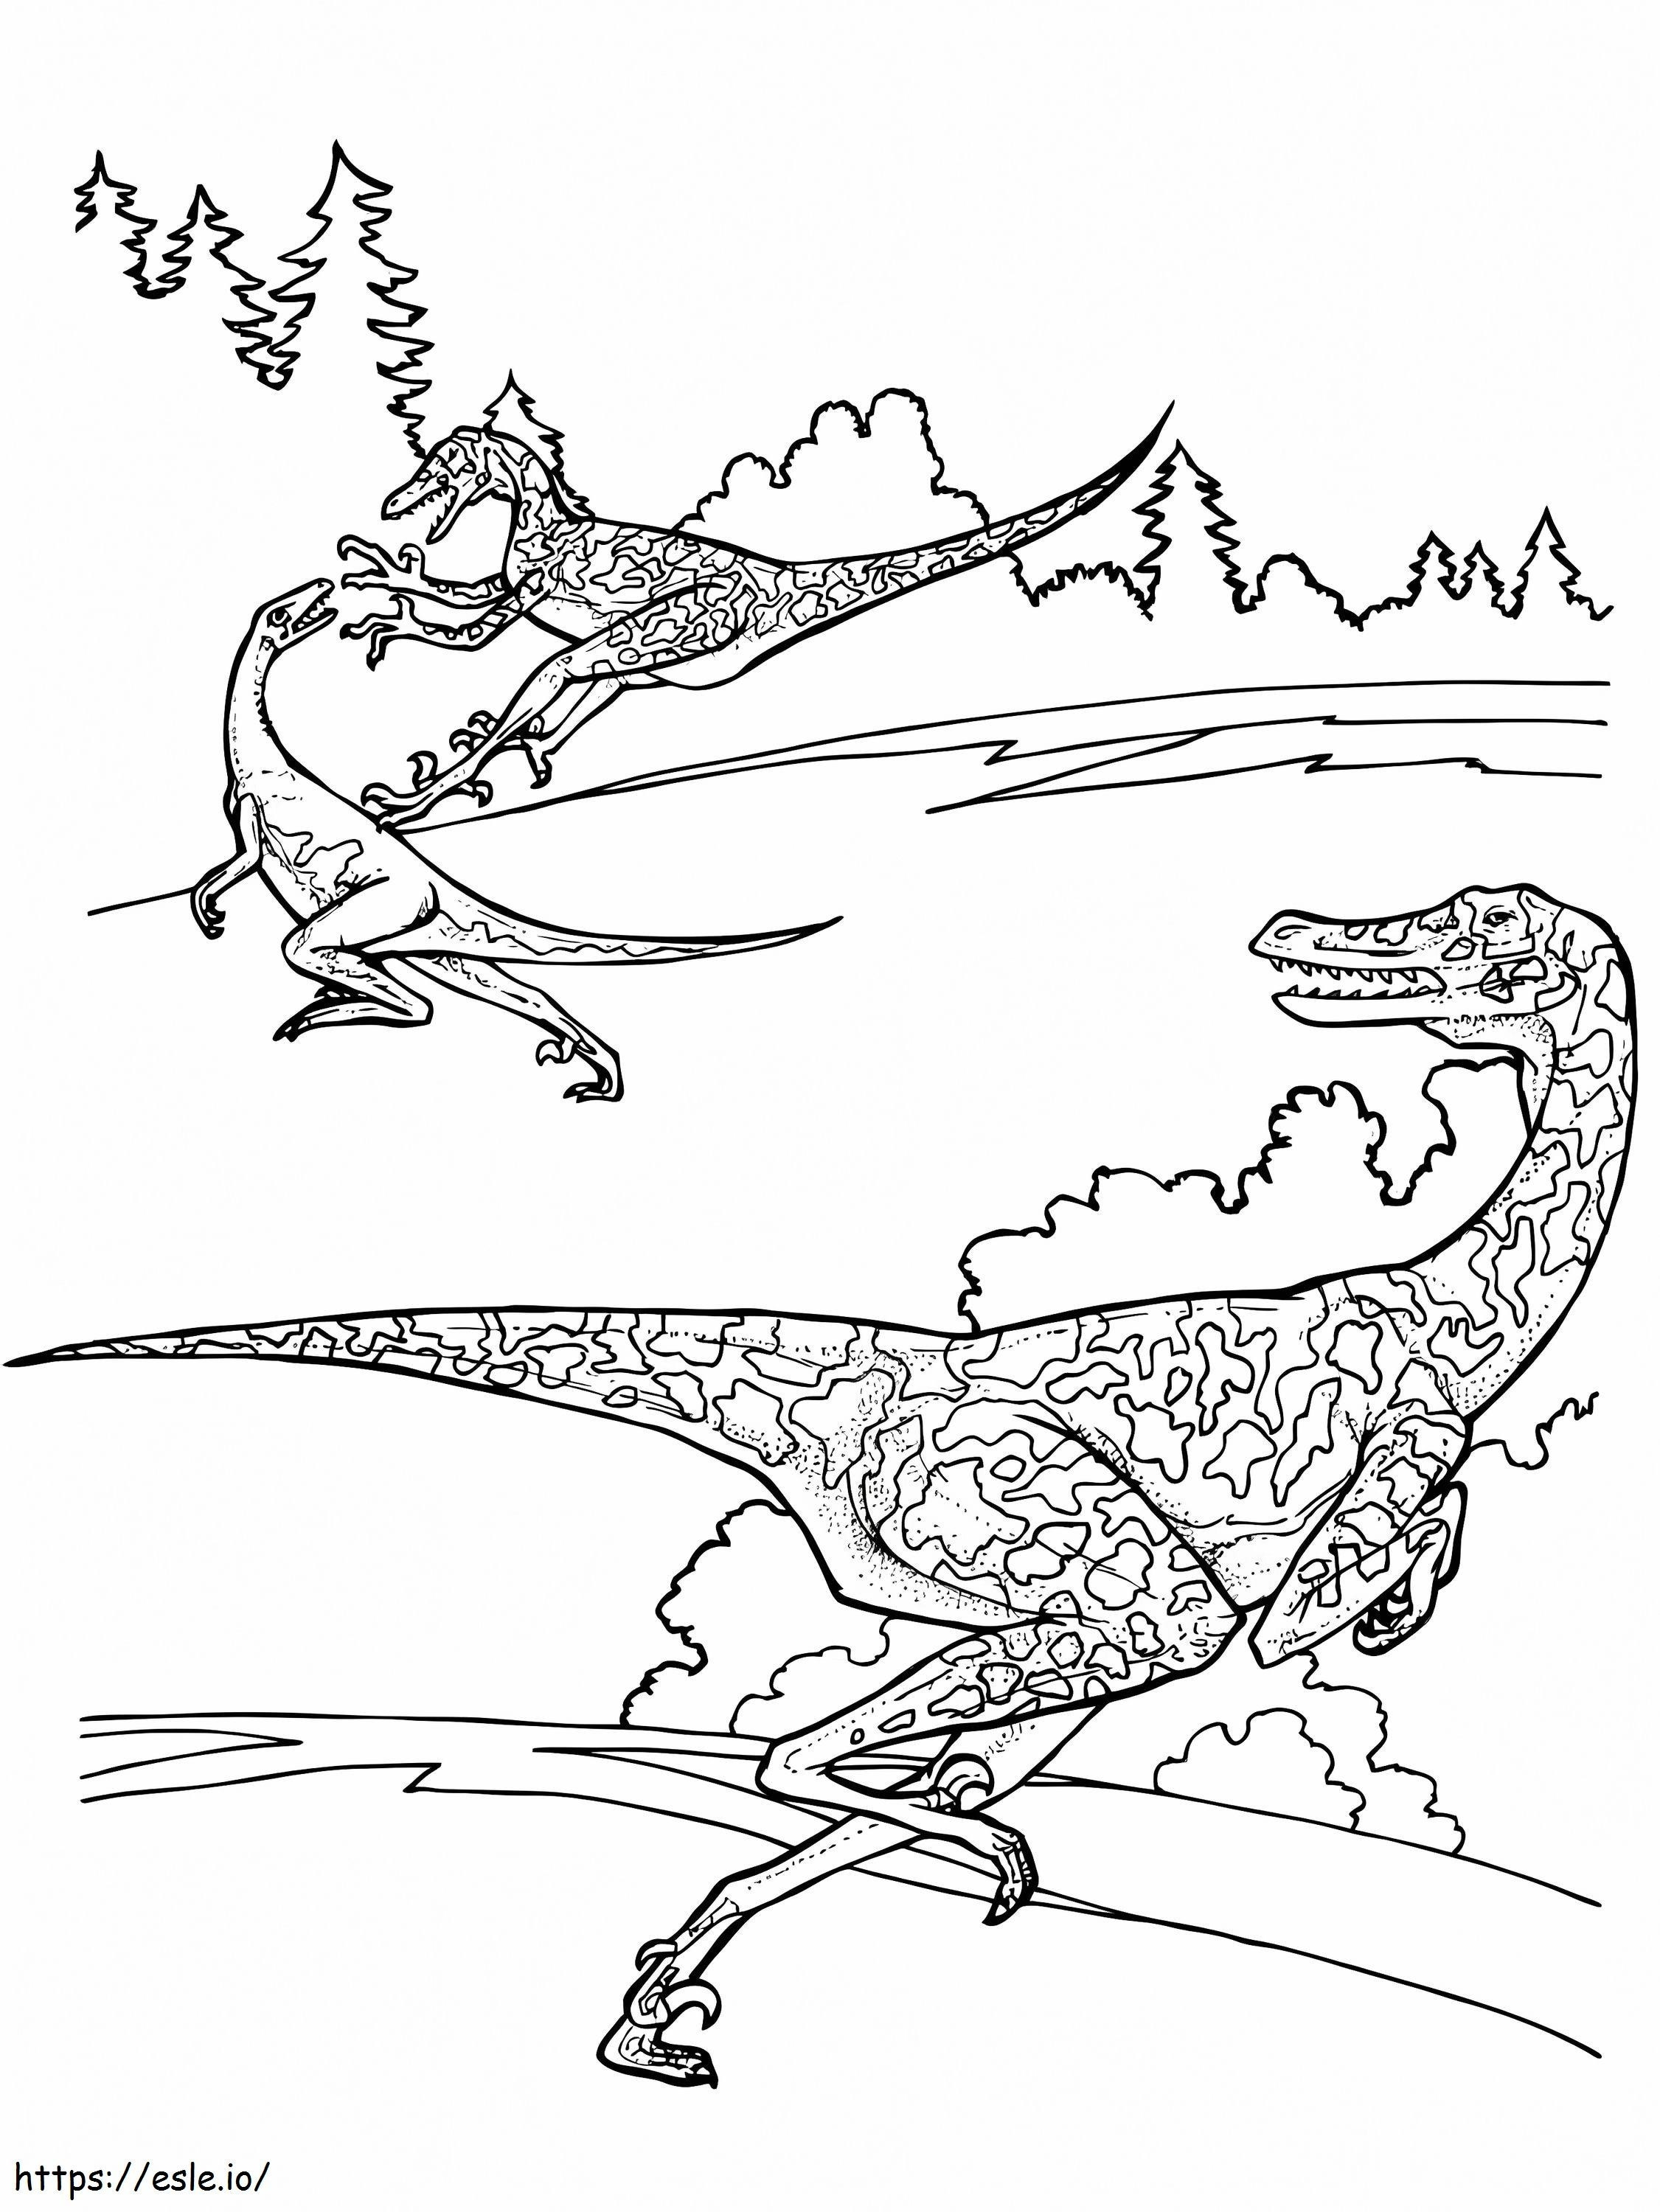 Velociraptor Dinosaurs coloring page